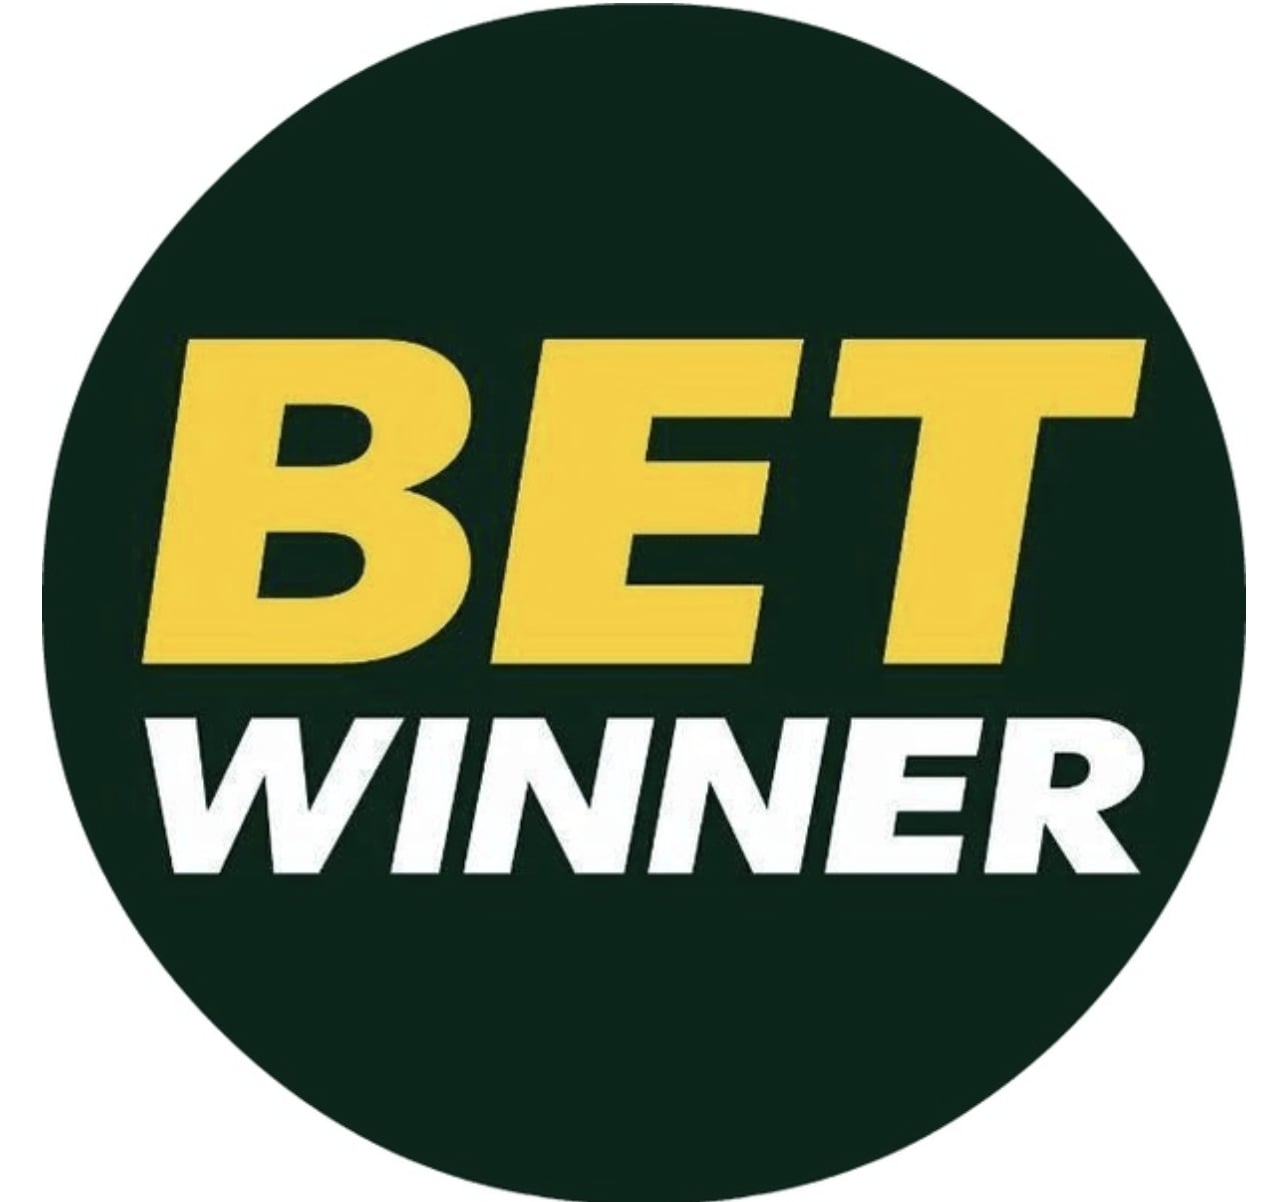 Take 10 Minutes to Get Started With Online Betting with Betwinner